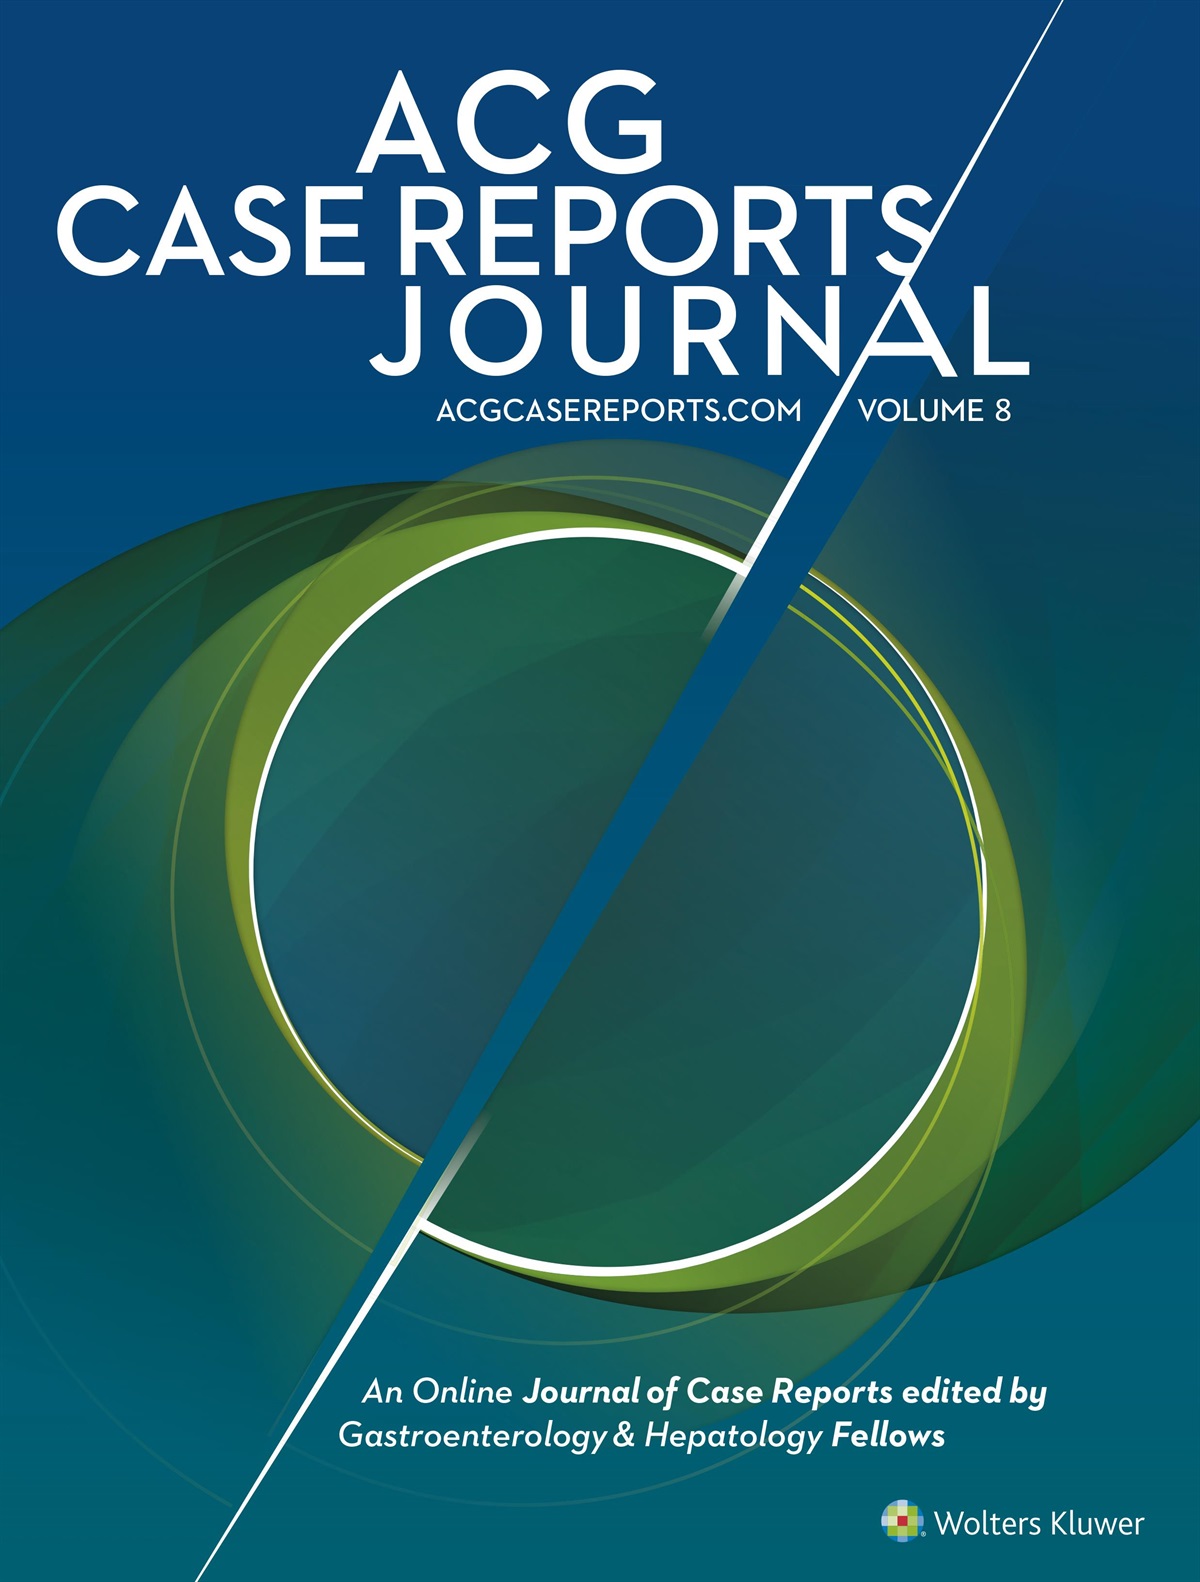 ACG Case Reports Journal: Where It Started